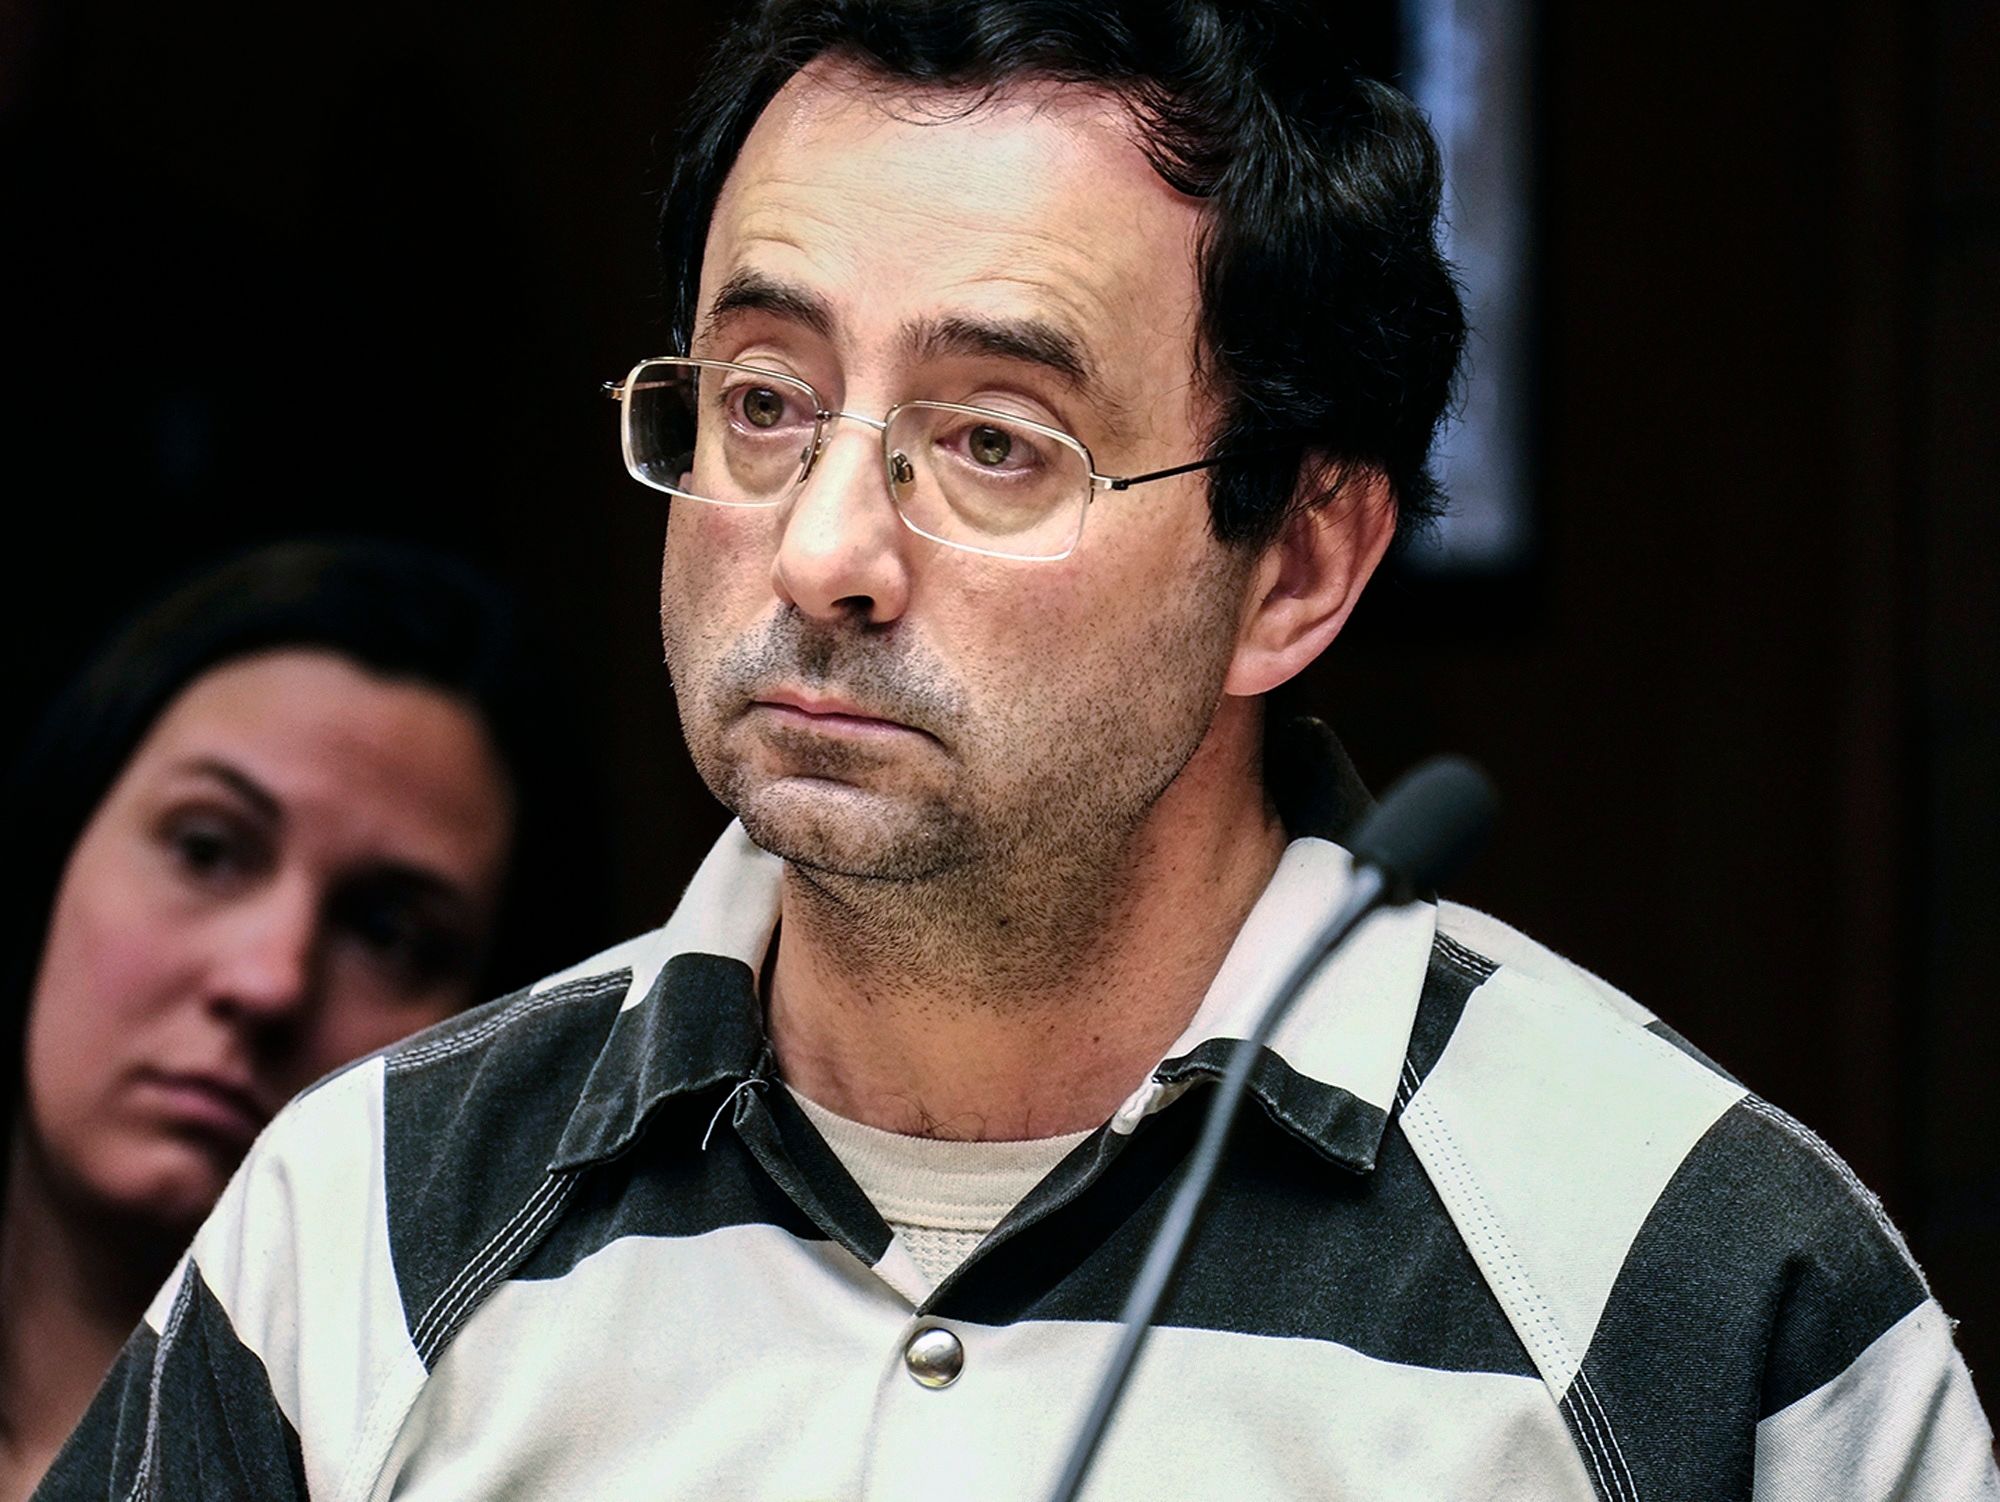 Gymnastics scandal reveals wider issue of Olympic sex abuse The Seattle Times pic pic